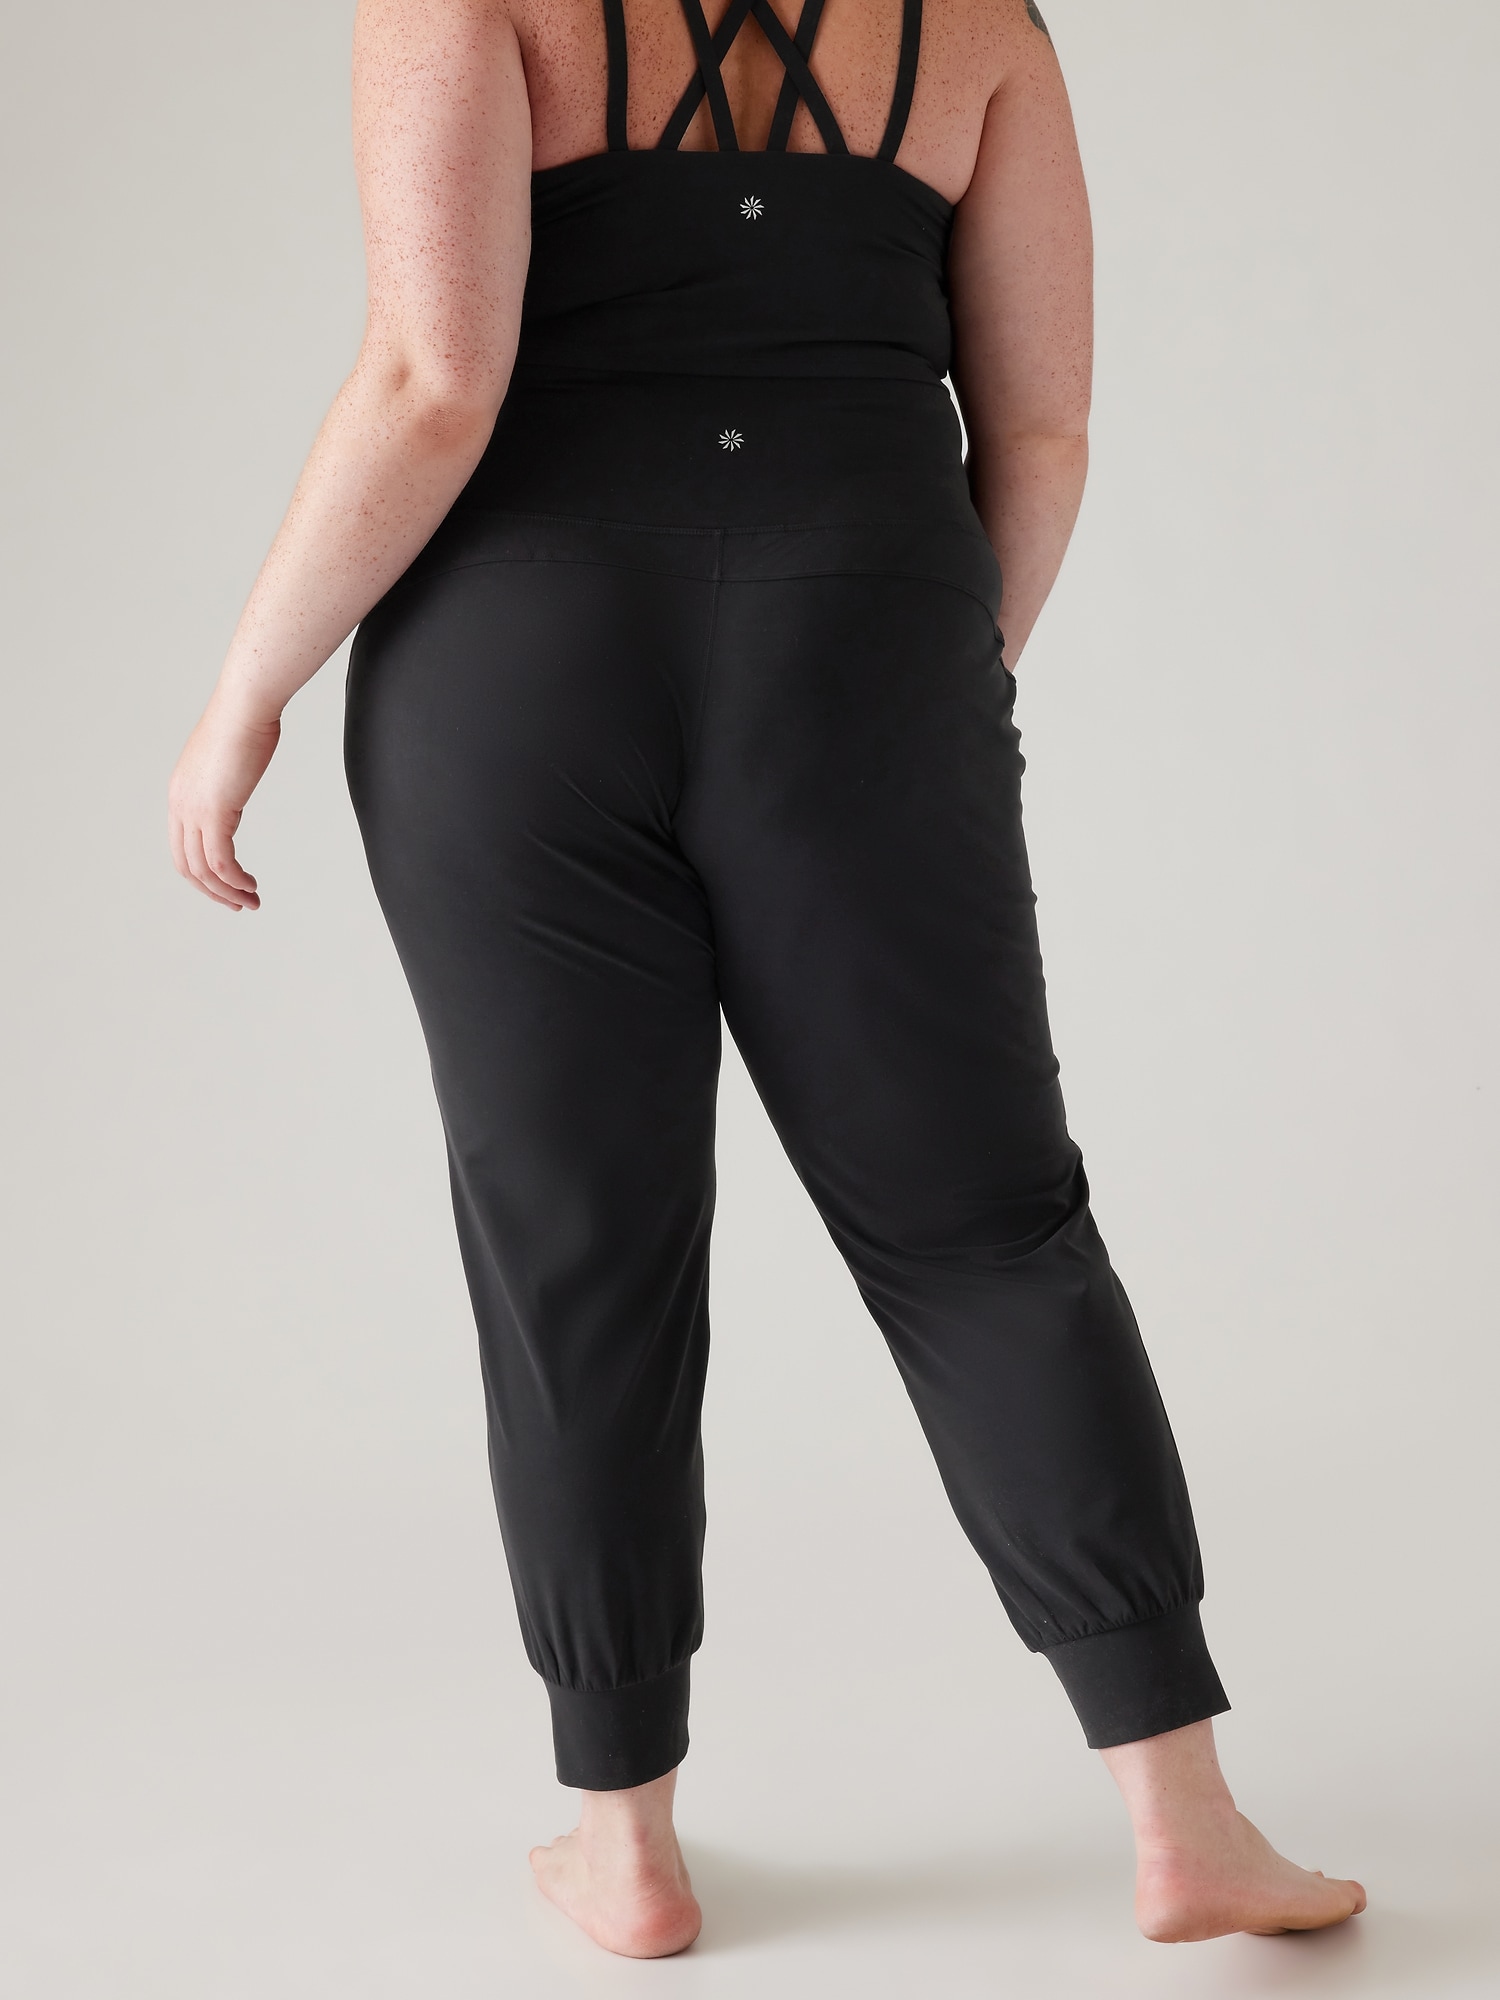 Stay Active and Stylish with the Olive Salutation Jogger